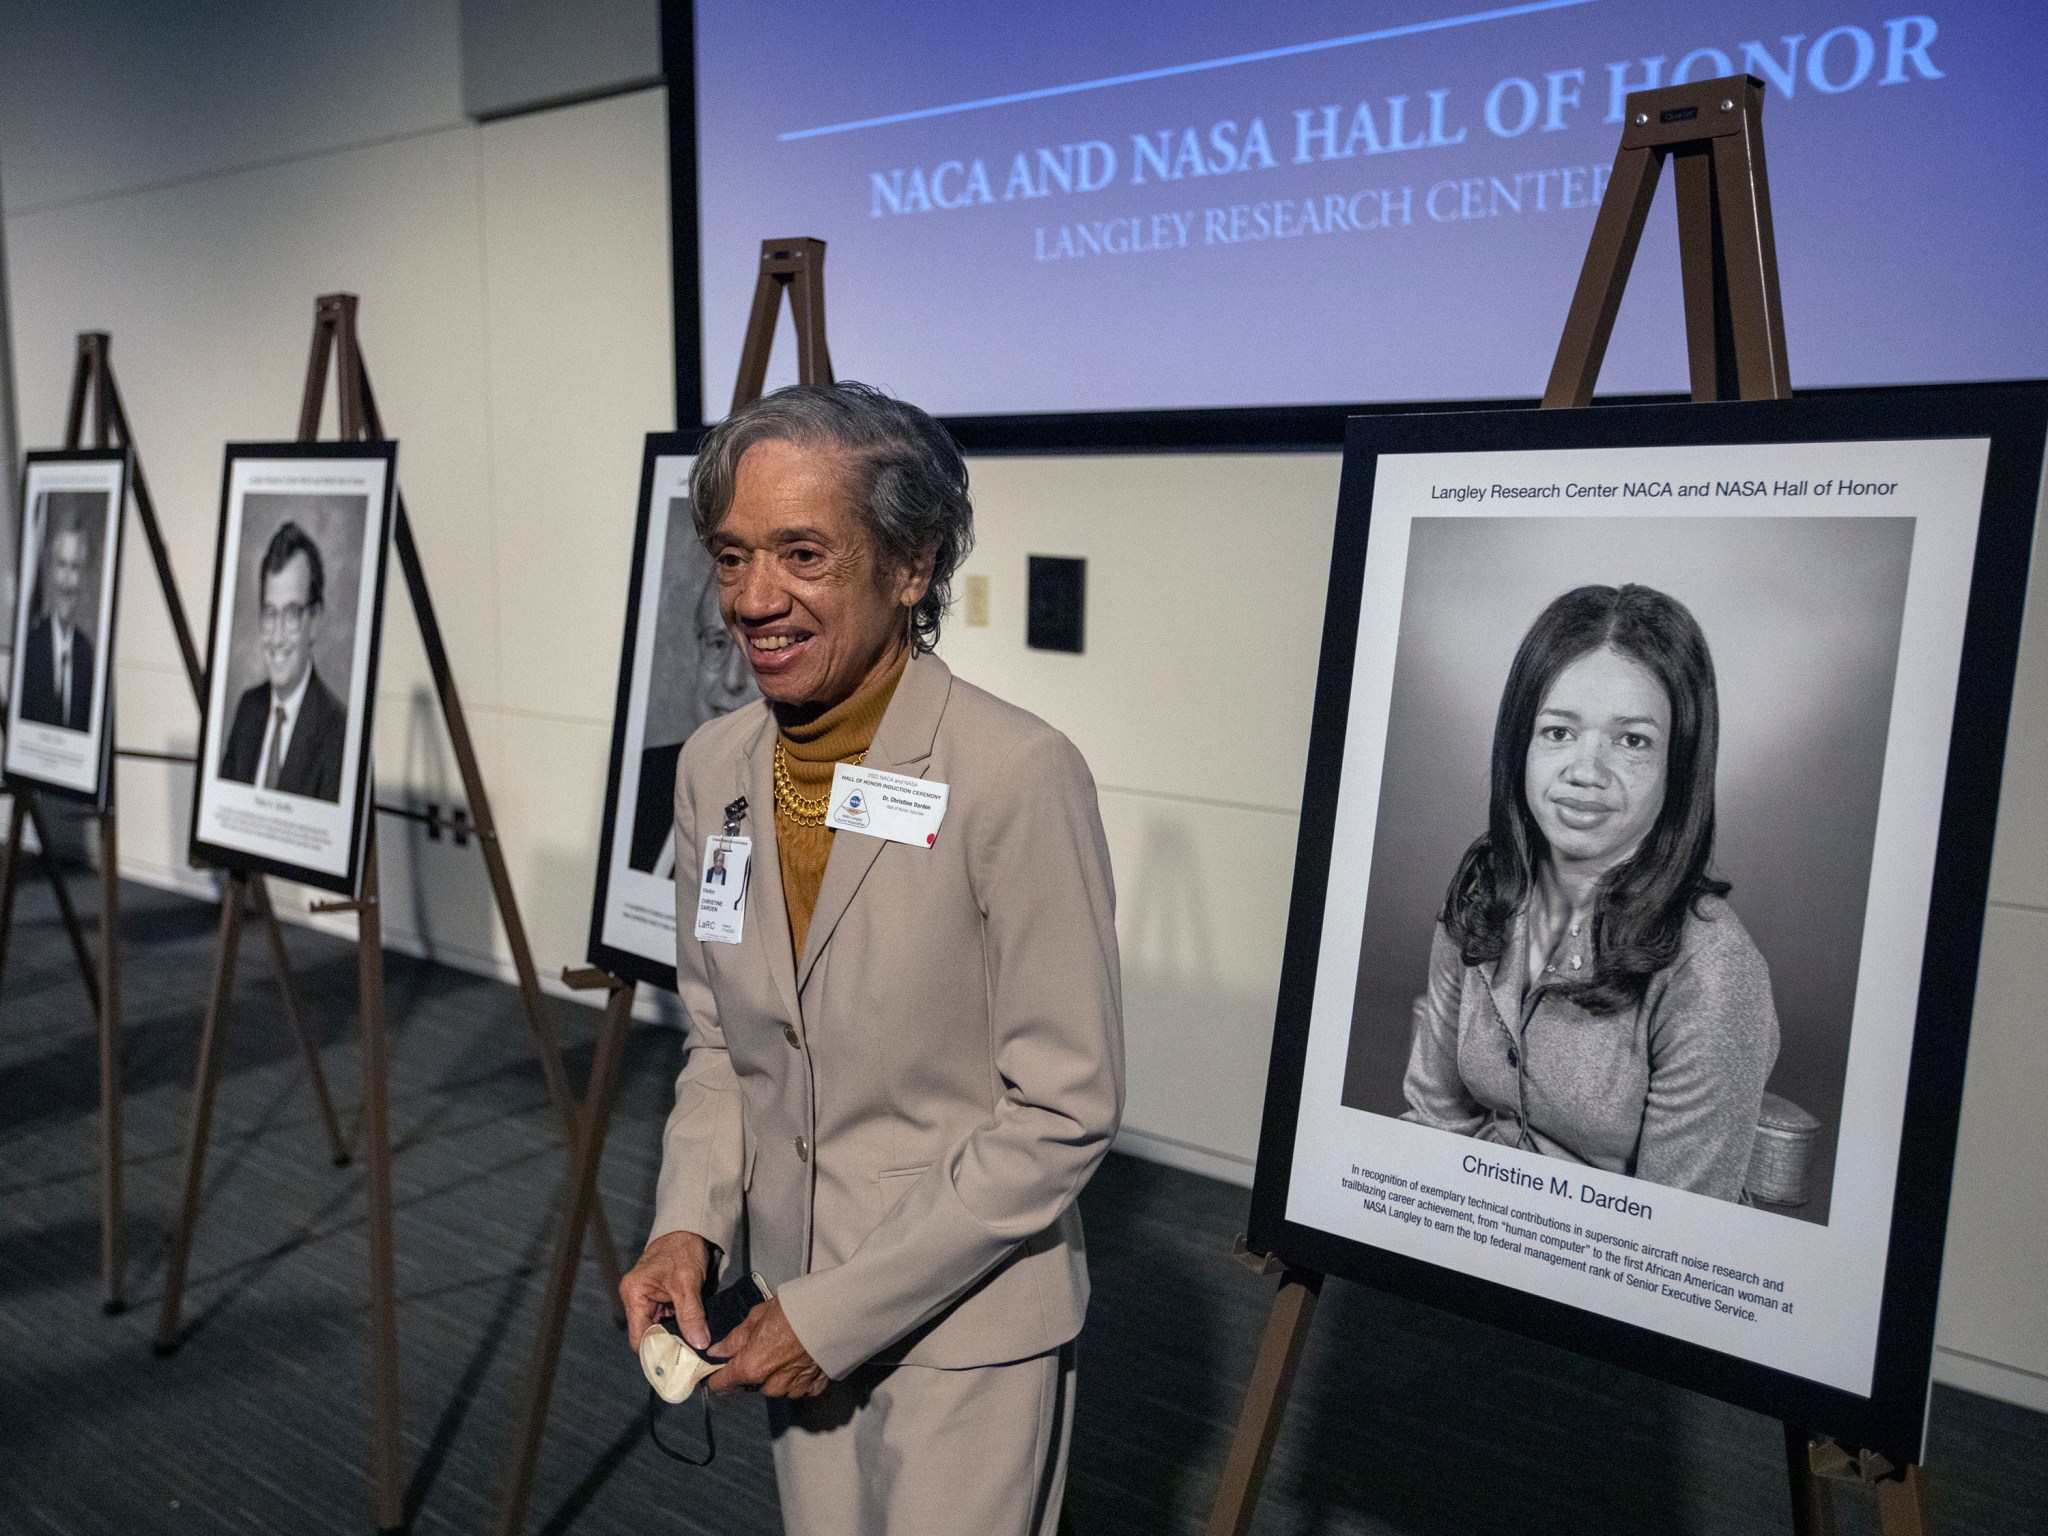 Christine Darden was among the 17 people inducted into the Langley Research Center NACA and NASA Hall of Honor July 14.